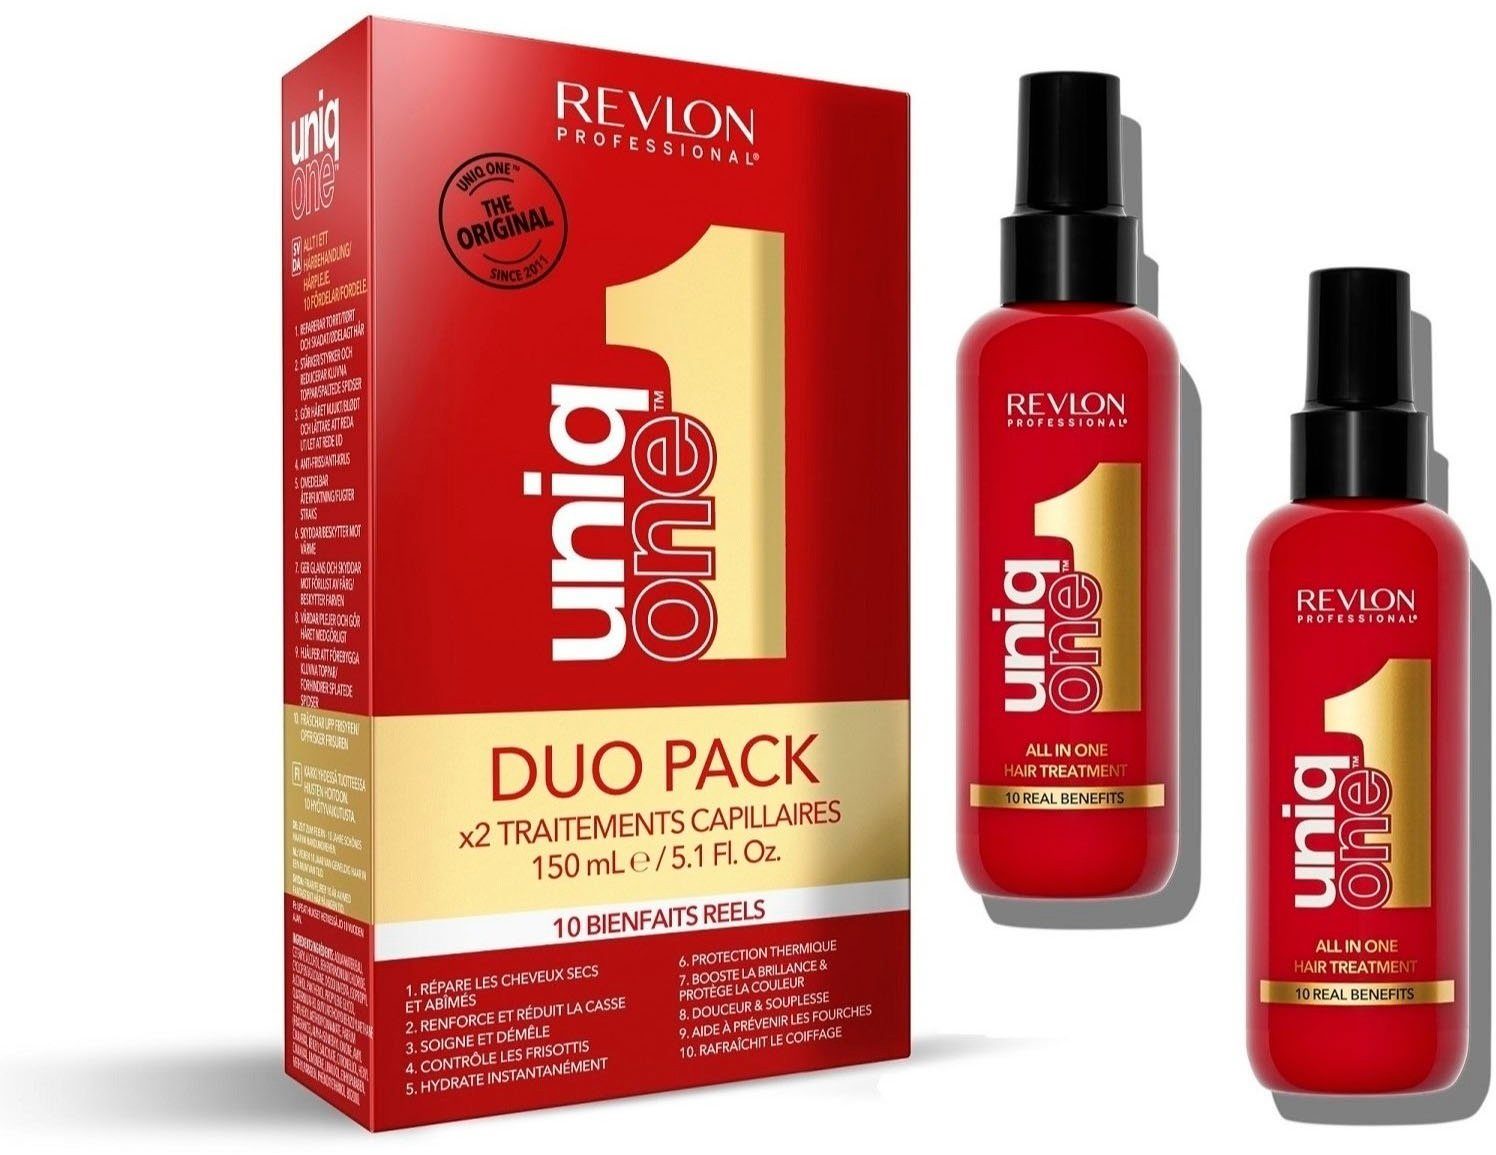 REVLON PROFESSIONAL Haarpflege-Set Uniqone All In One Hair Leave-in Pflege Treatment Classic Duopack Set, Spar-Set, 2-tlg., Limited Edition